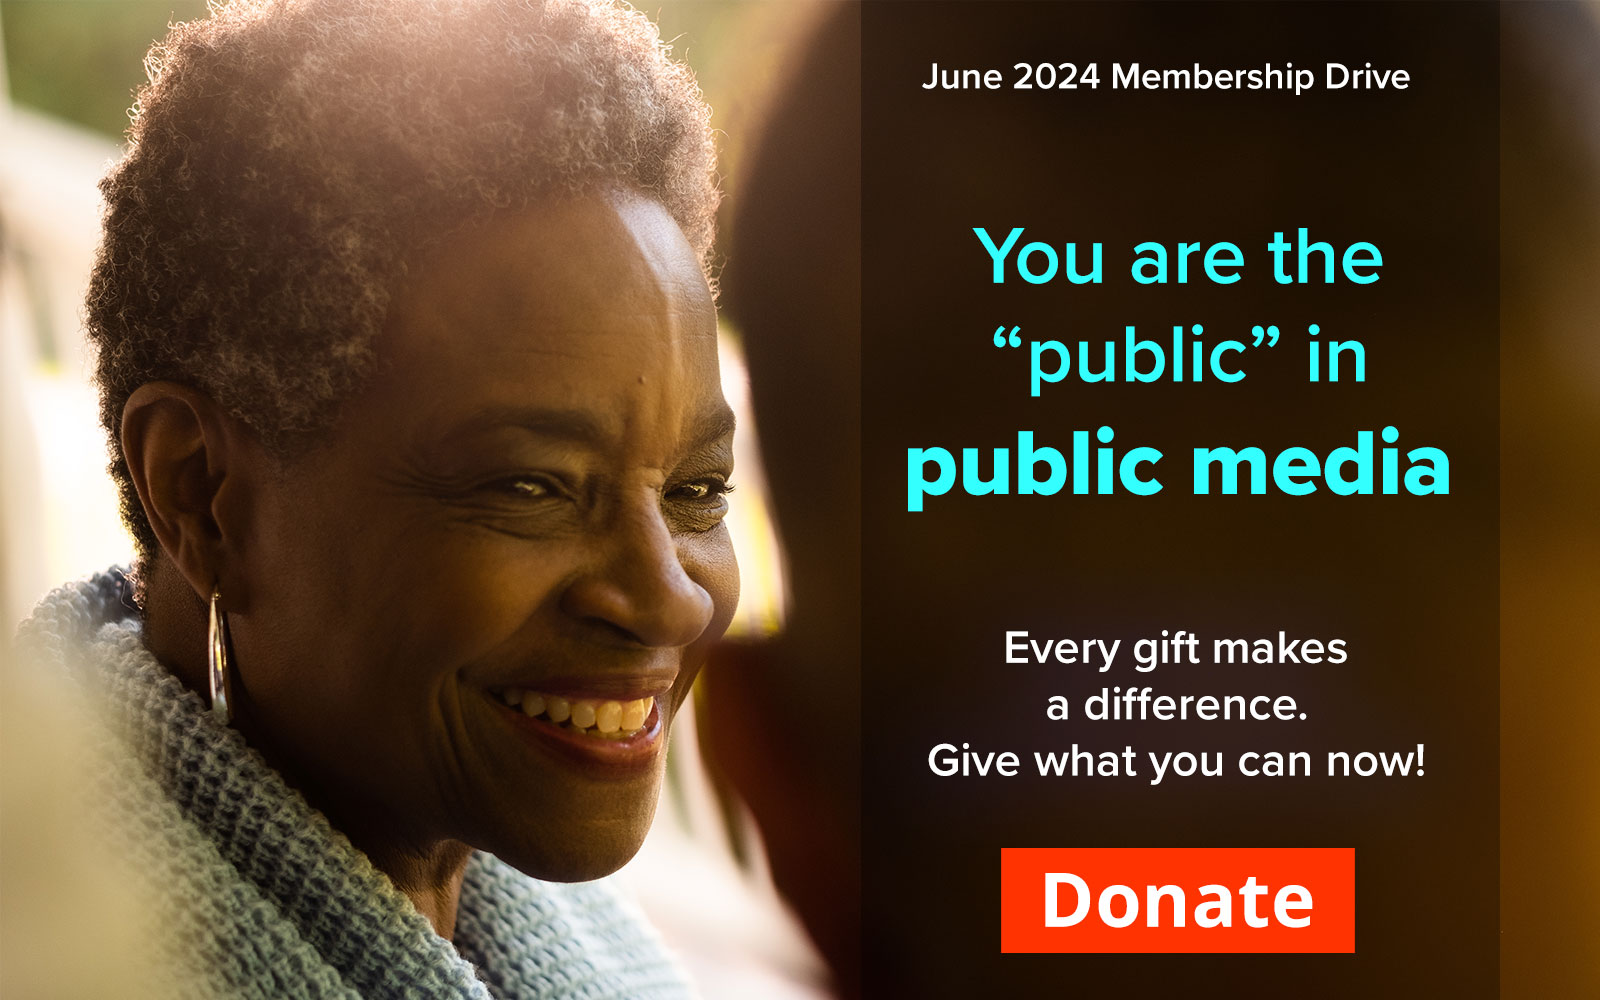 Donate and support WTTW's June Membership Drive!